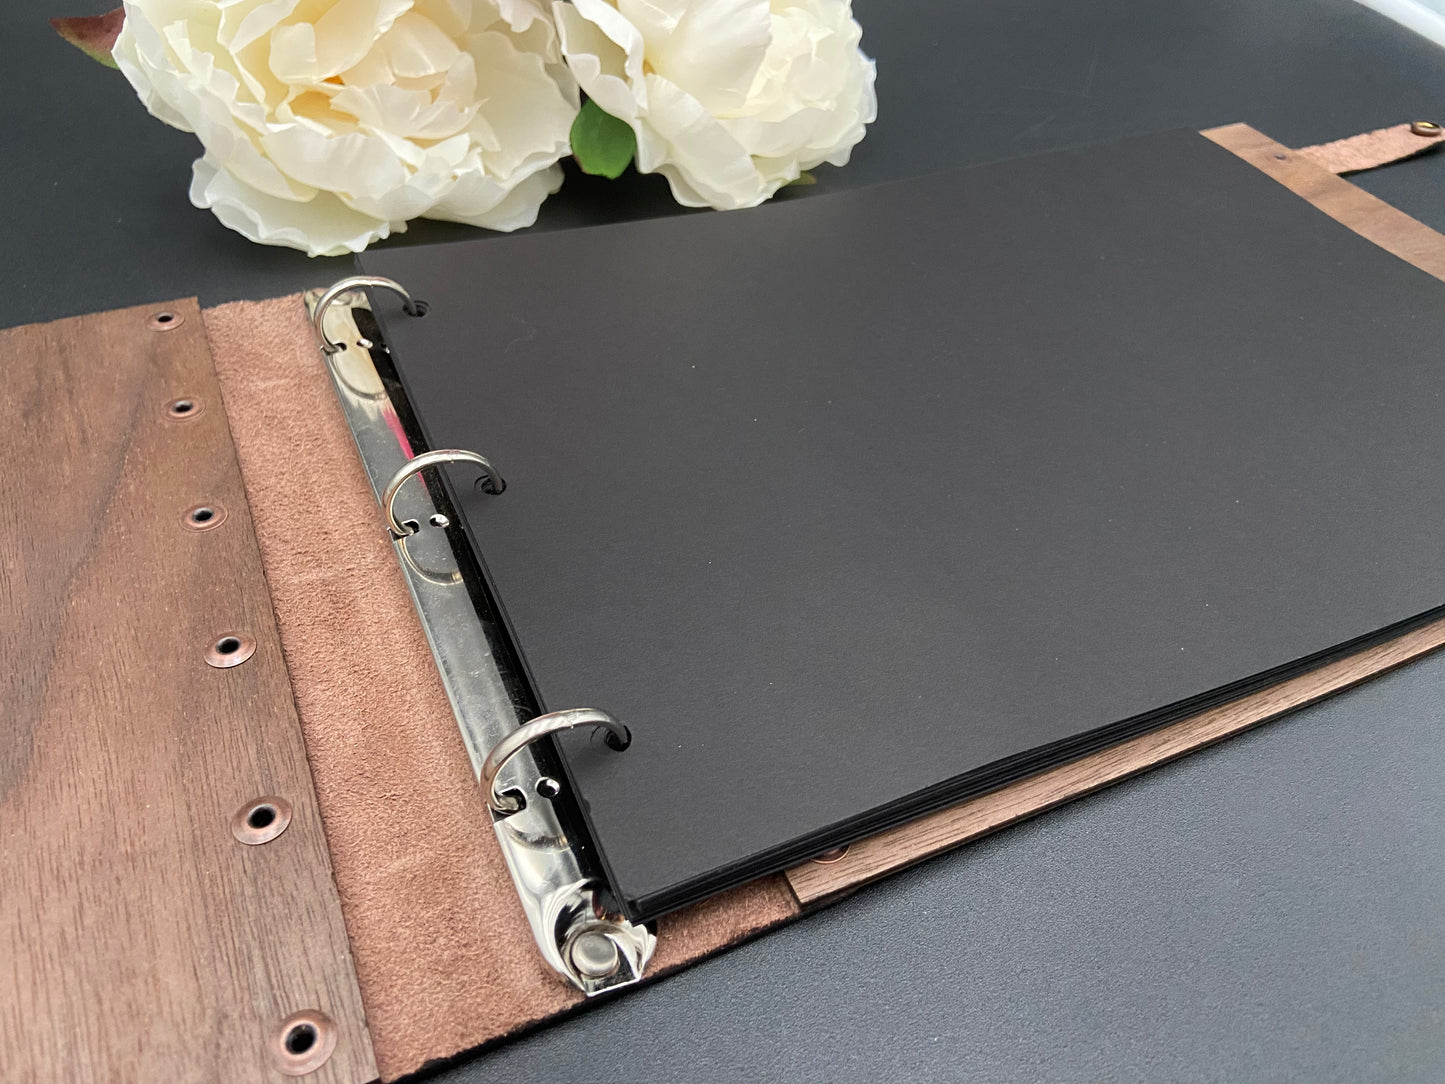 Wood and Leather Guest Book